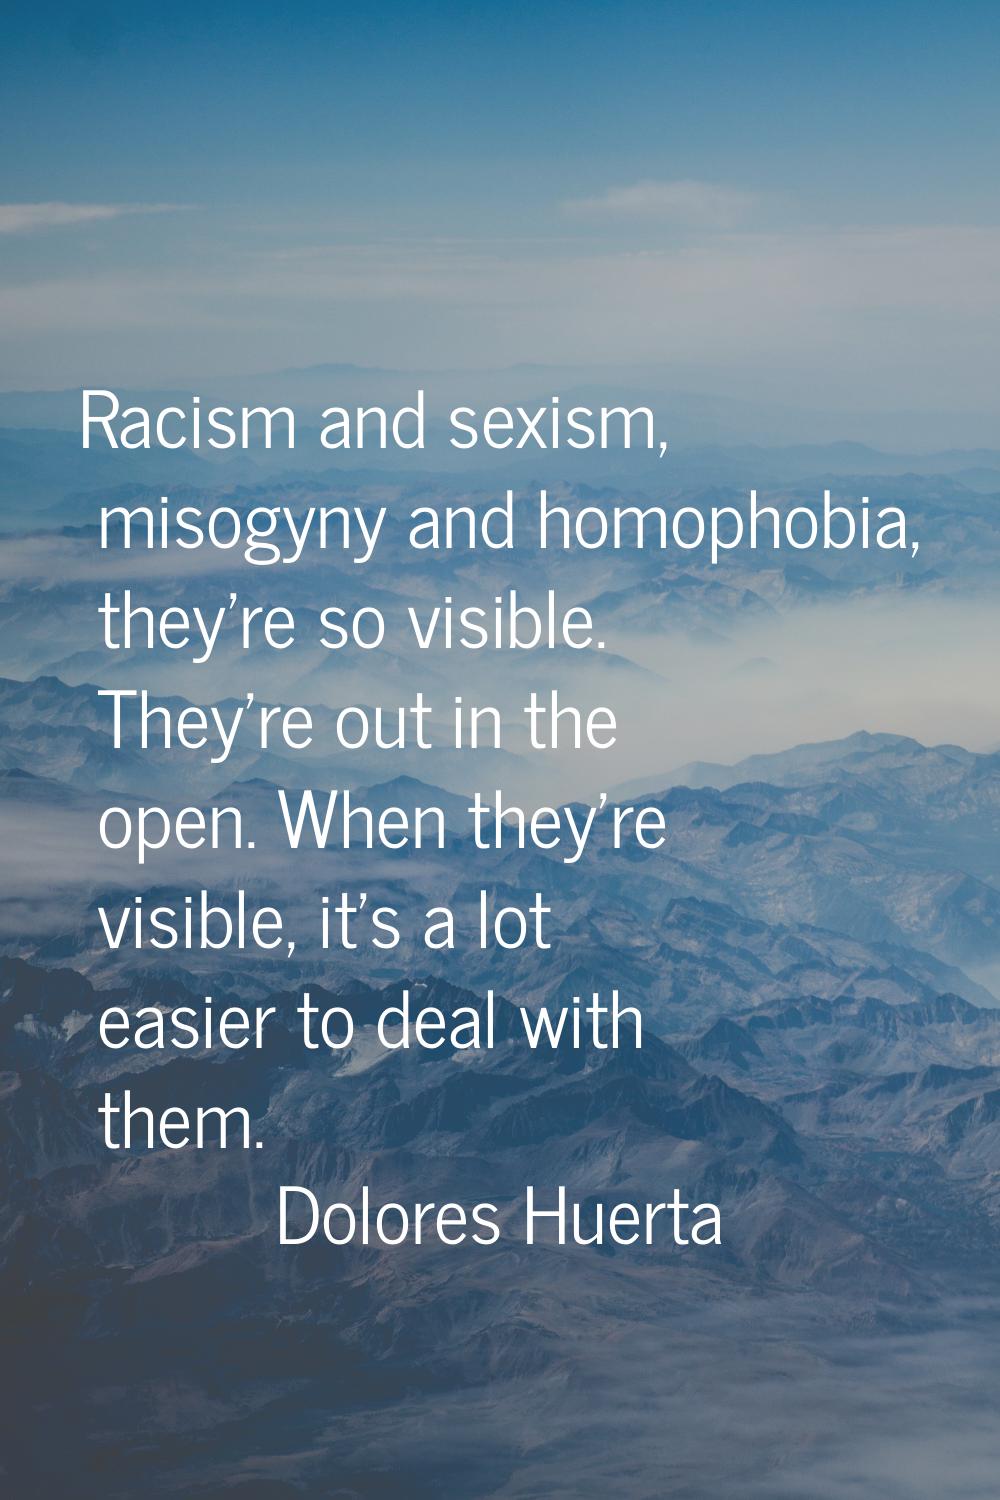 Racism and sexism, misogyny and homophobia, they're so visible. They're out in the open. When they'